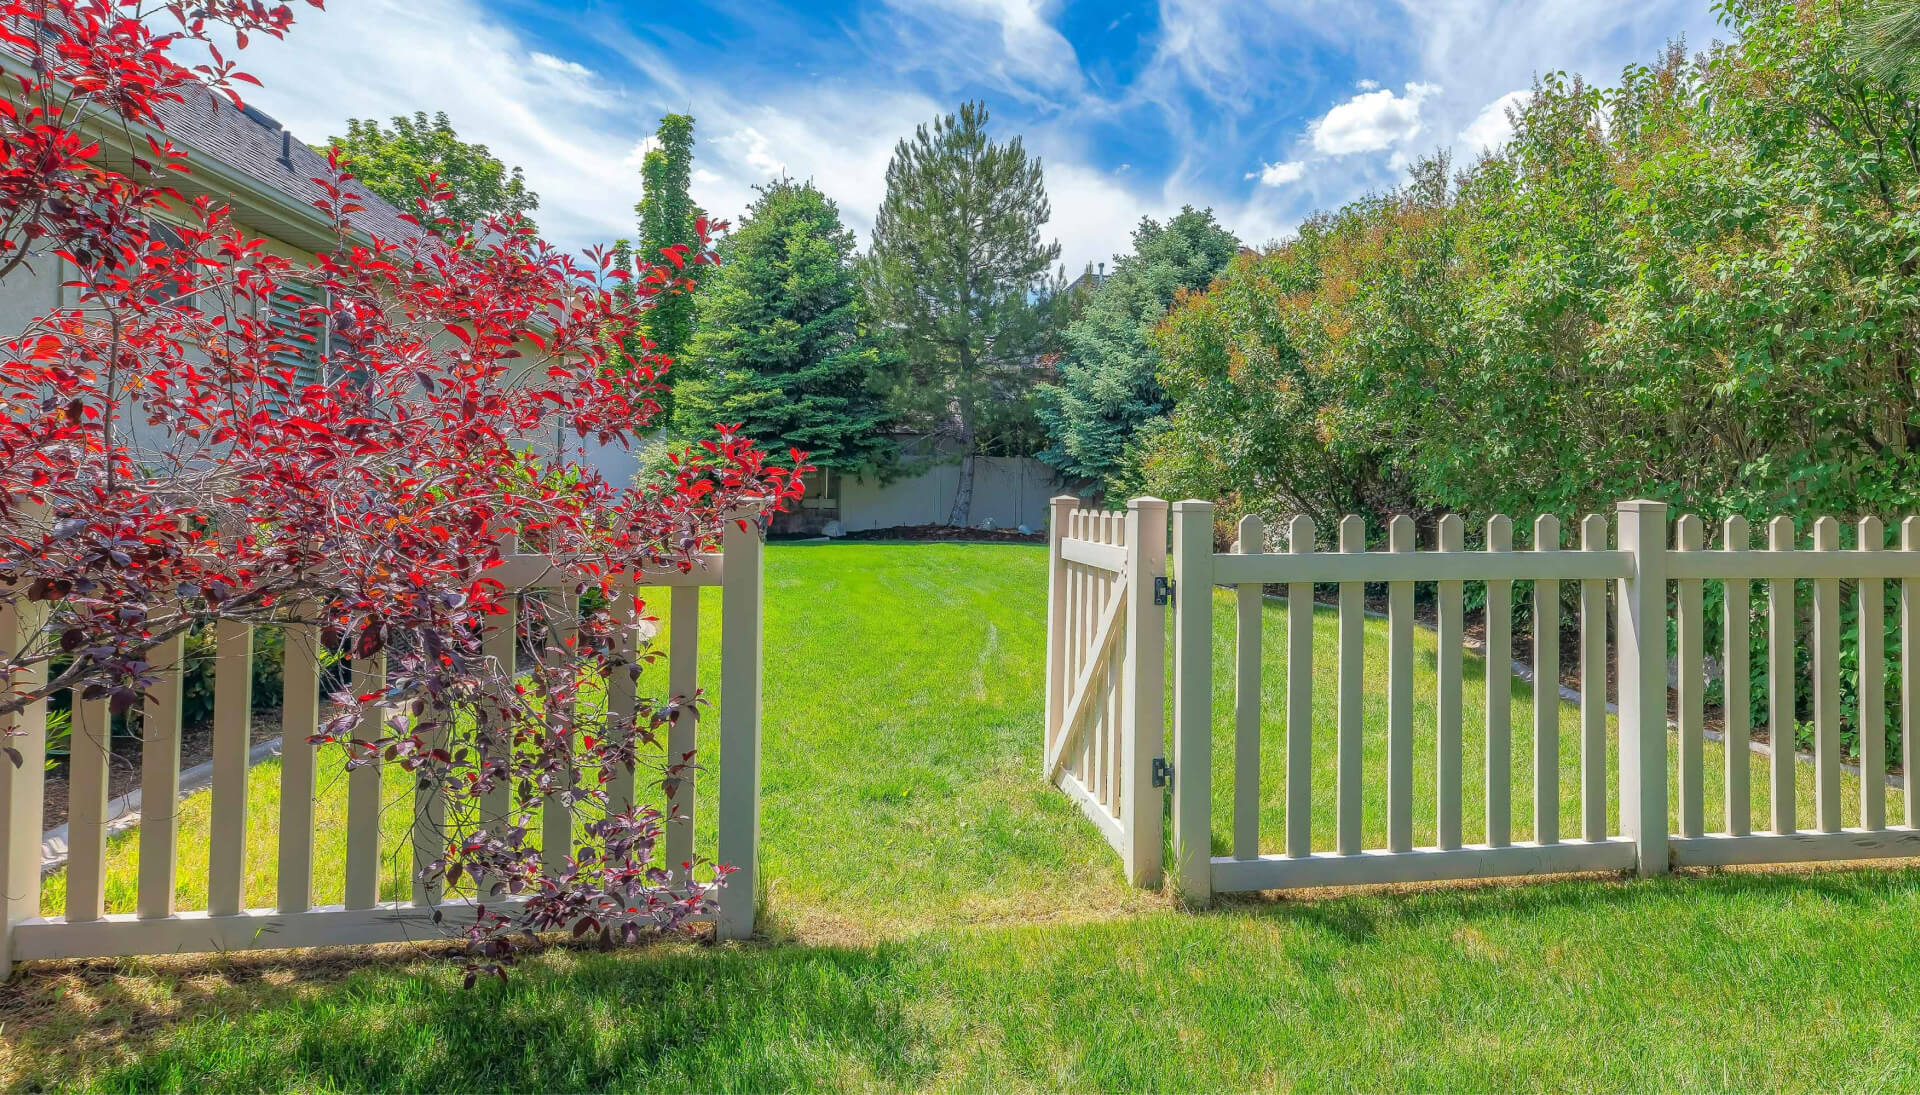 A functional fence gate providing access to a well-maintained backyard, surrounded by a wooden fence in Wichita